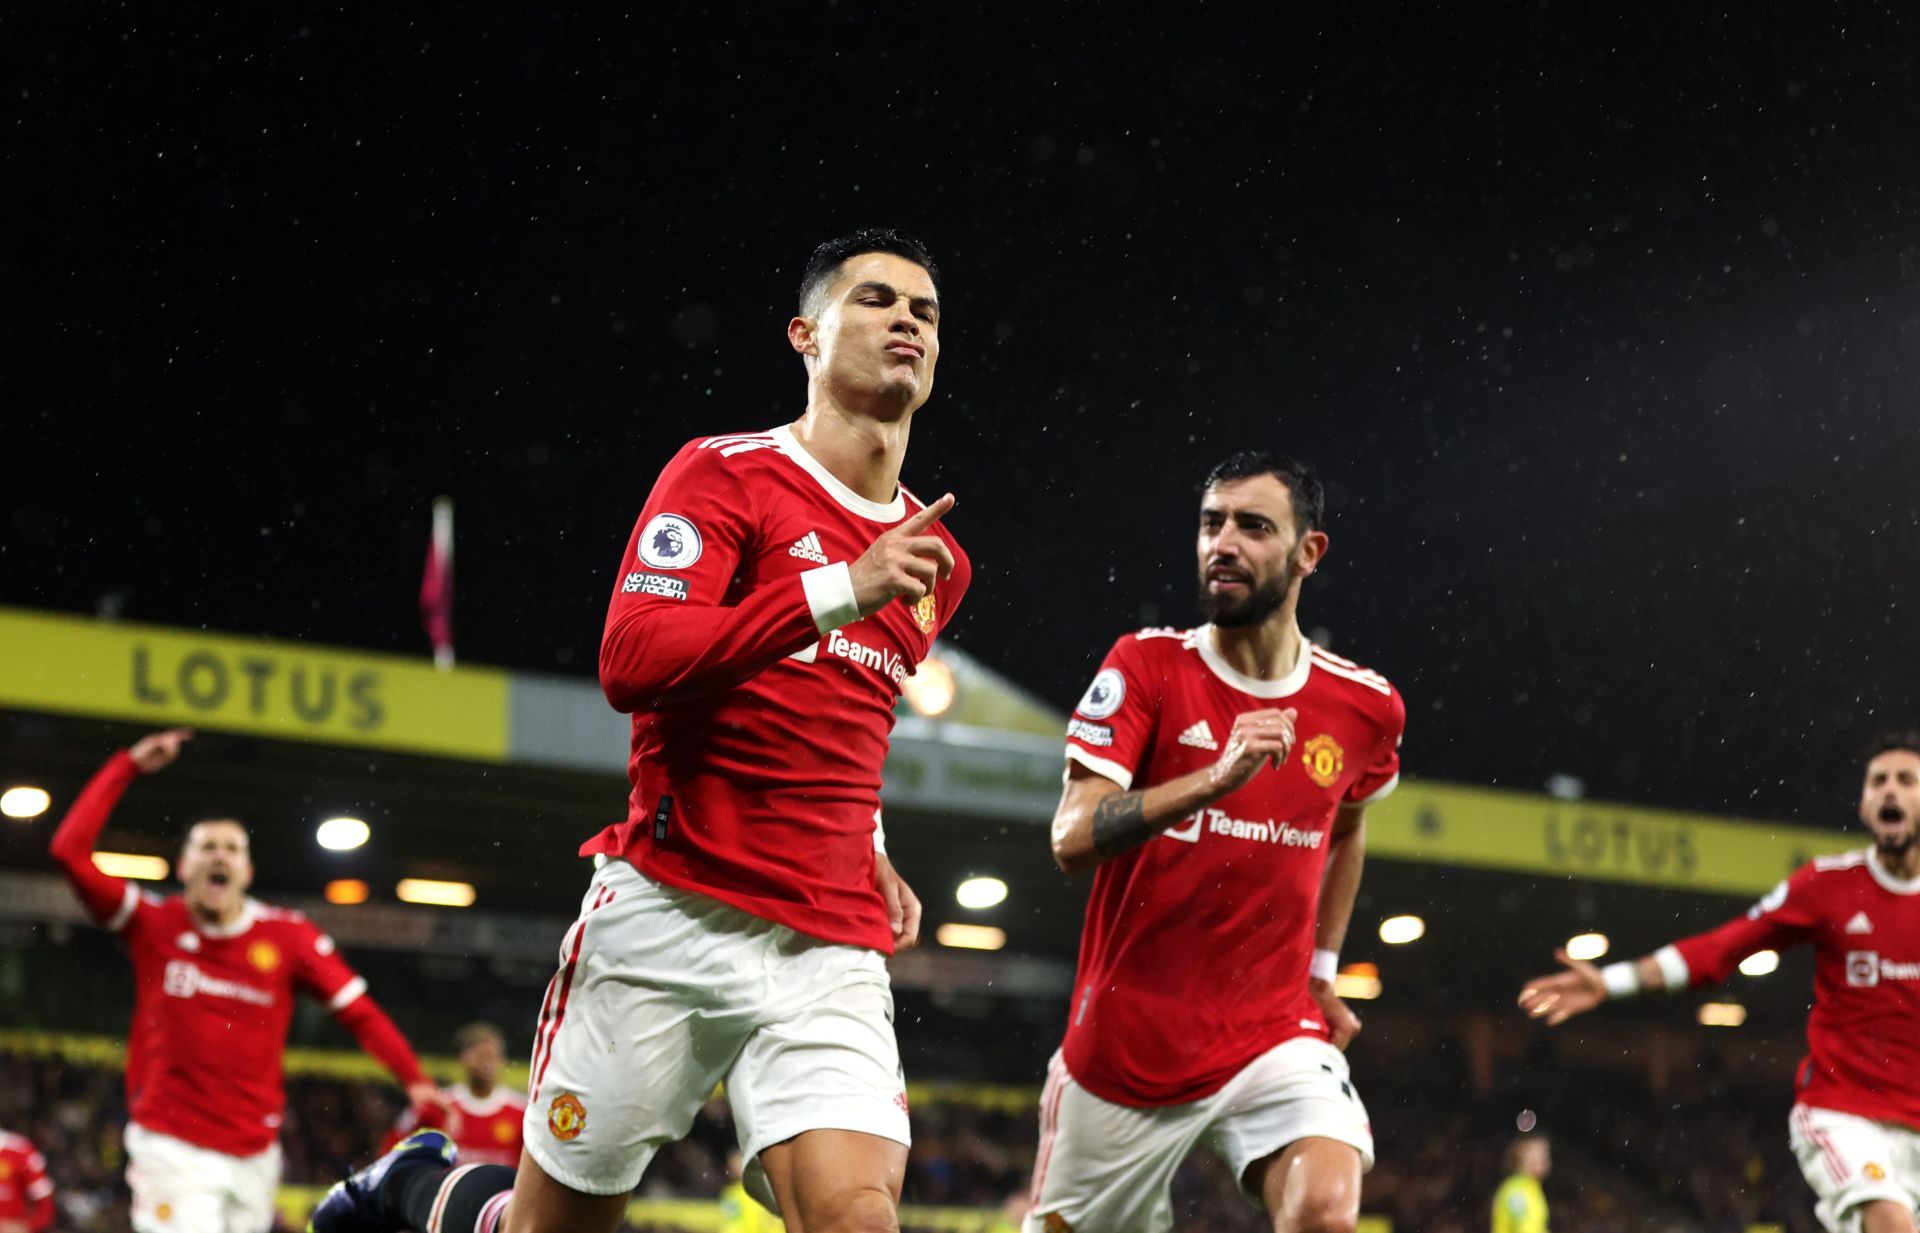 Cristiano Ronaldo is one of two Manchester United players nominated for the FIFRO World XI